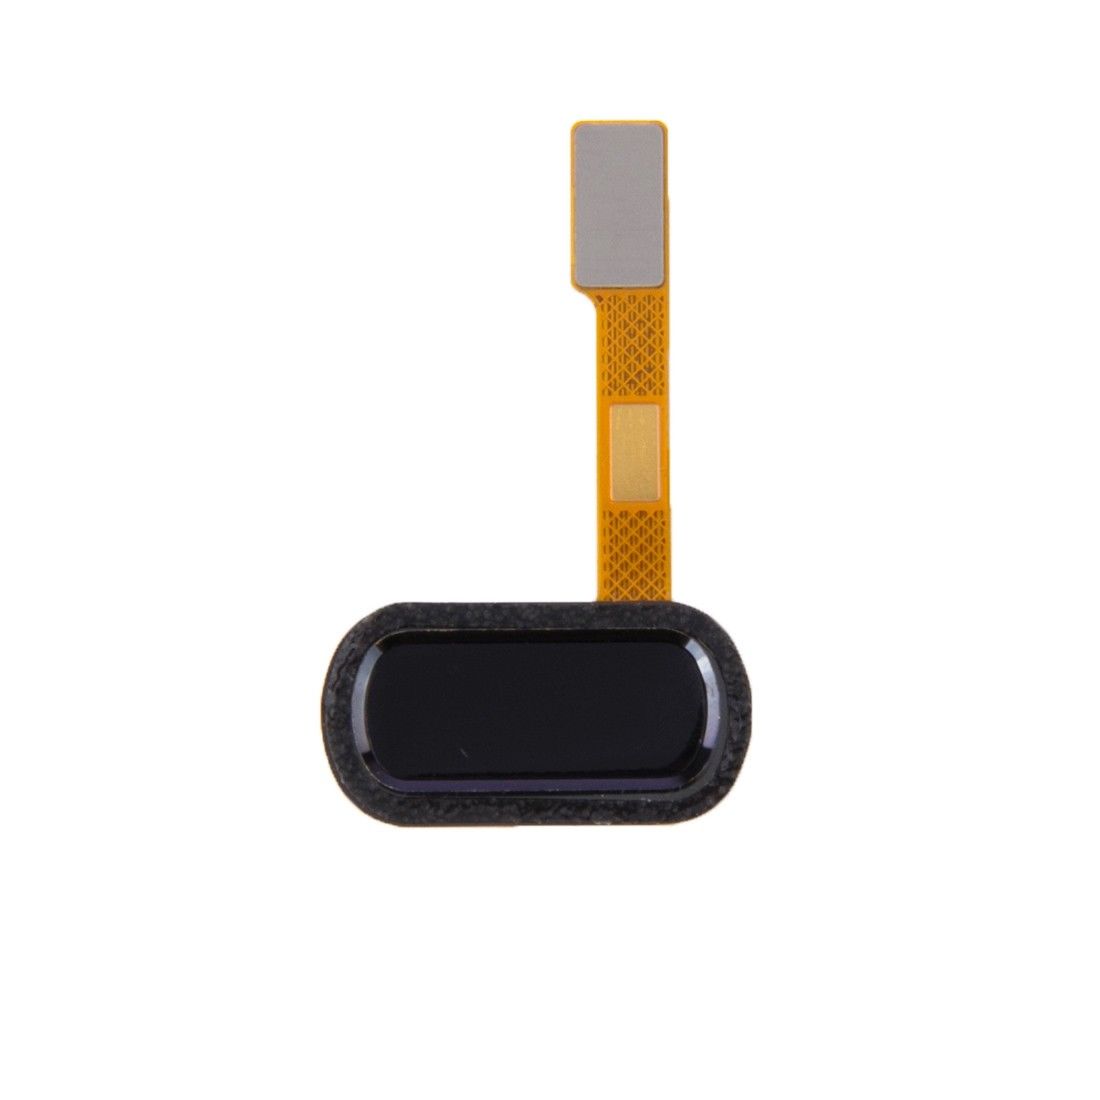 Oneplus Two (1+2) Replacement Home Button with Finger Print Sensor for [product_price] - First Help Tech